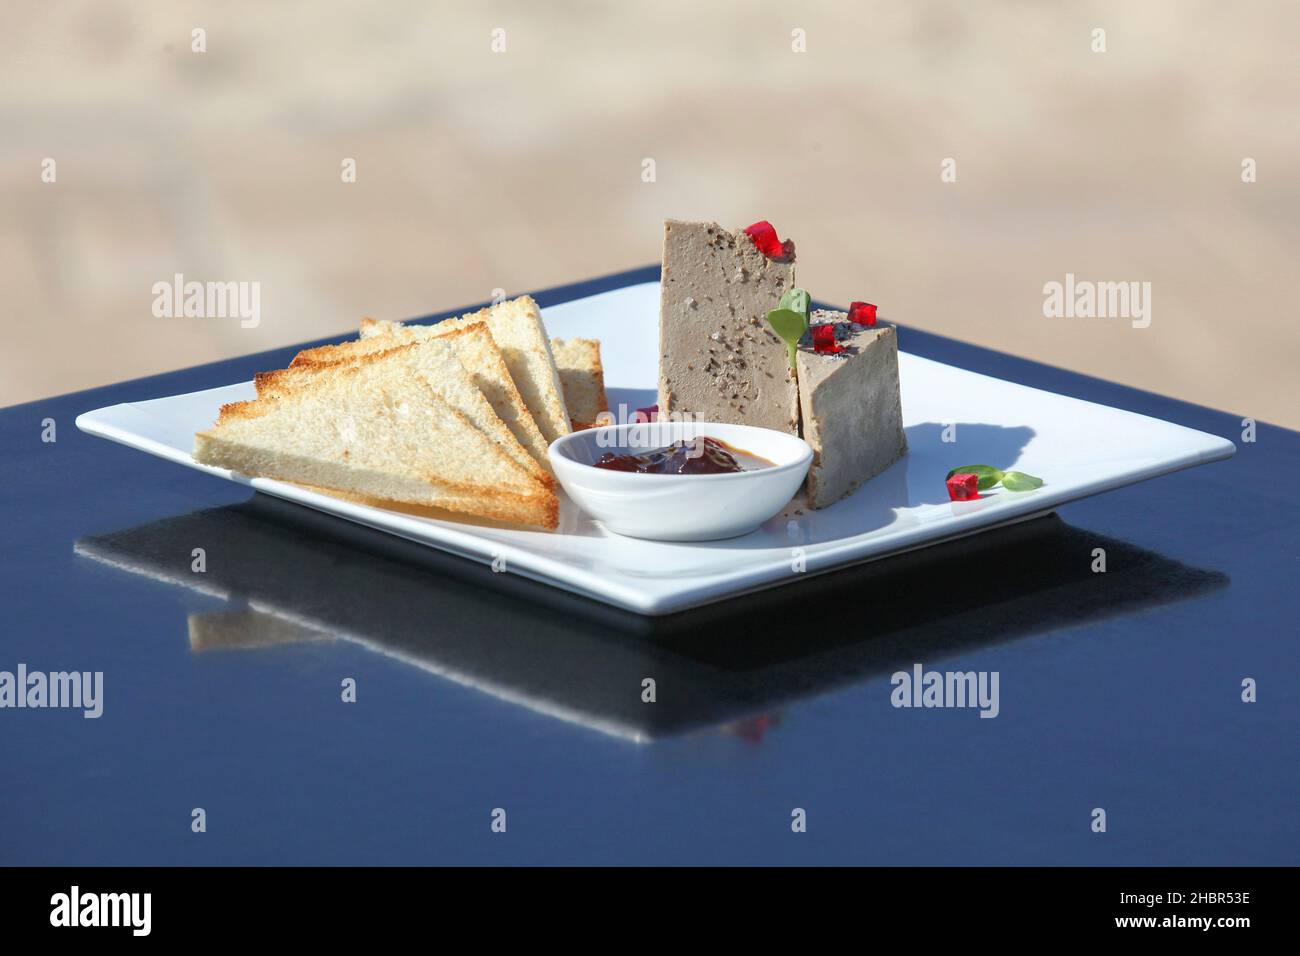 Decorated plate of liver pate with toast Stock Photo